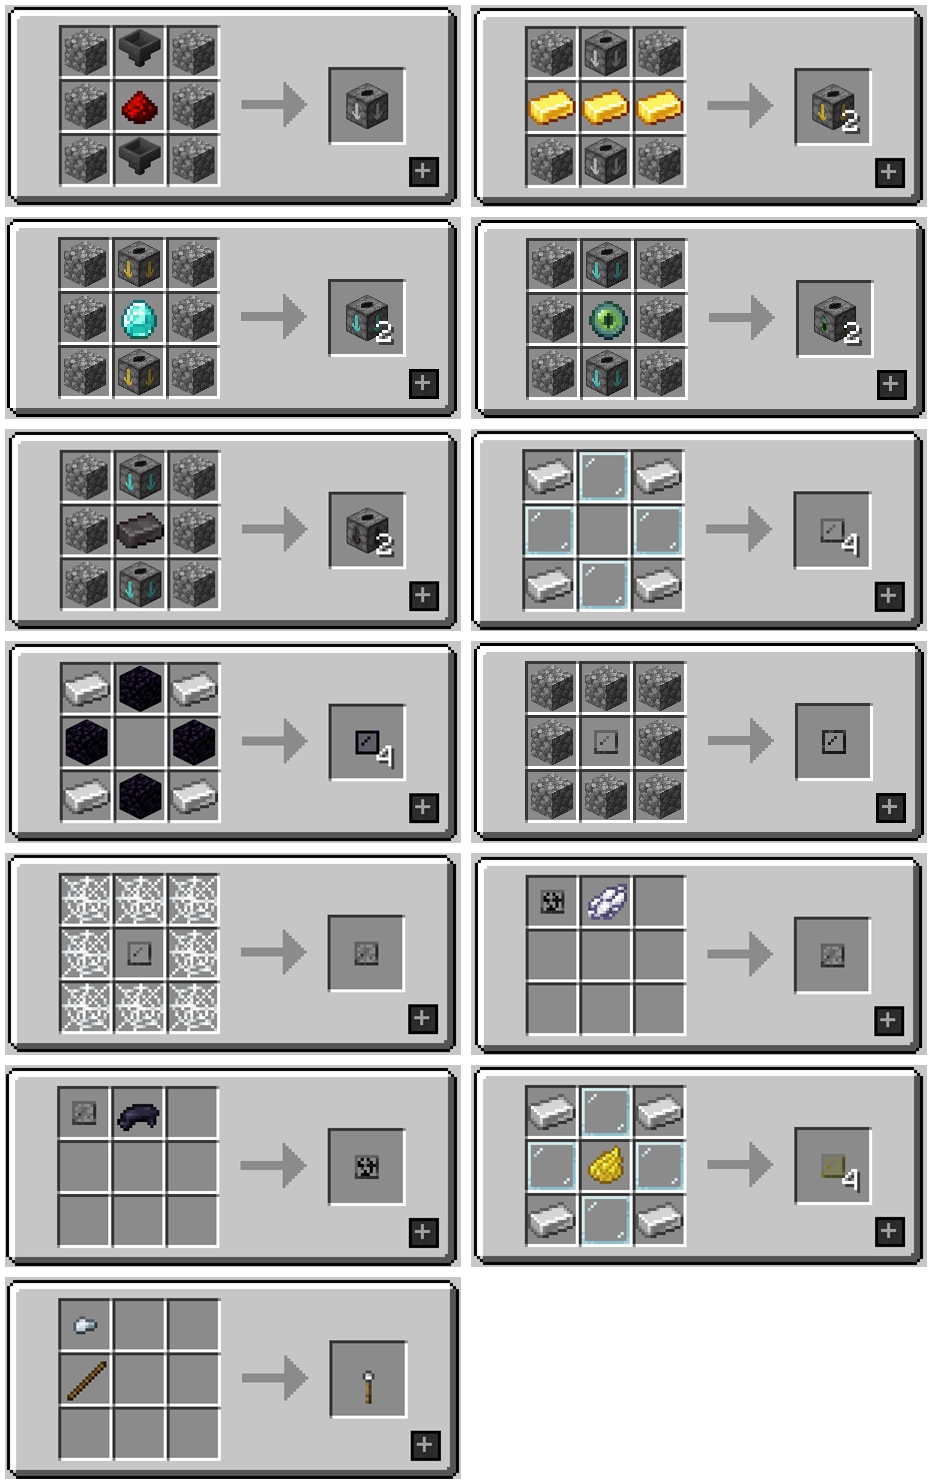 EZ Pipes and Stuff mod for minecraft 38